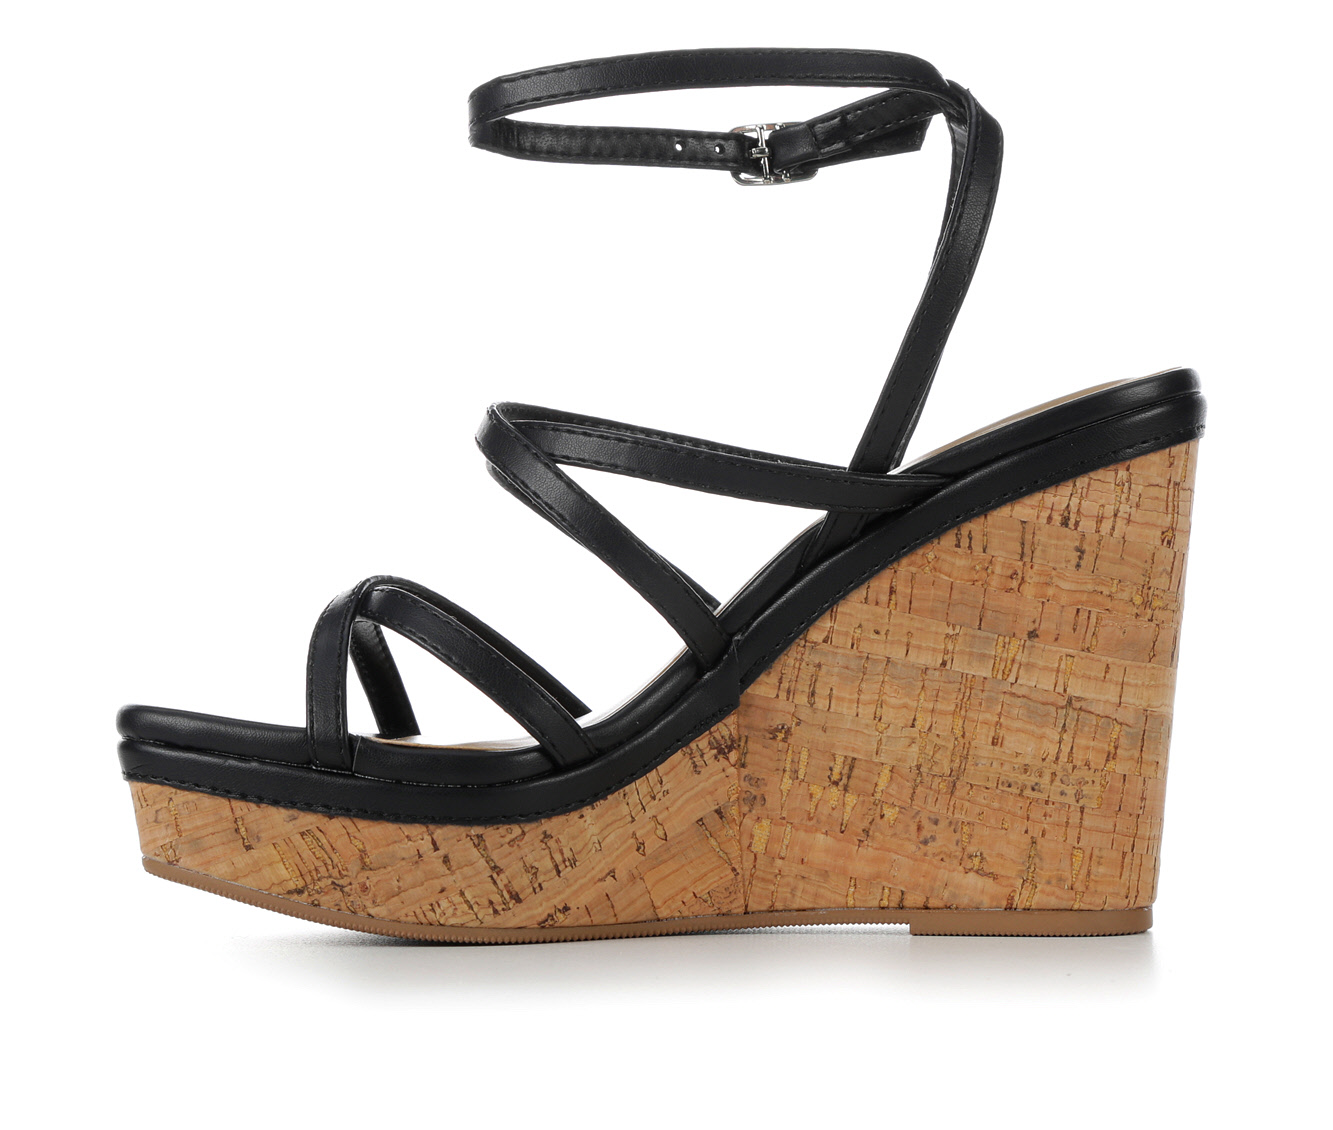 Black wedge sandals with multiple straps